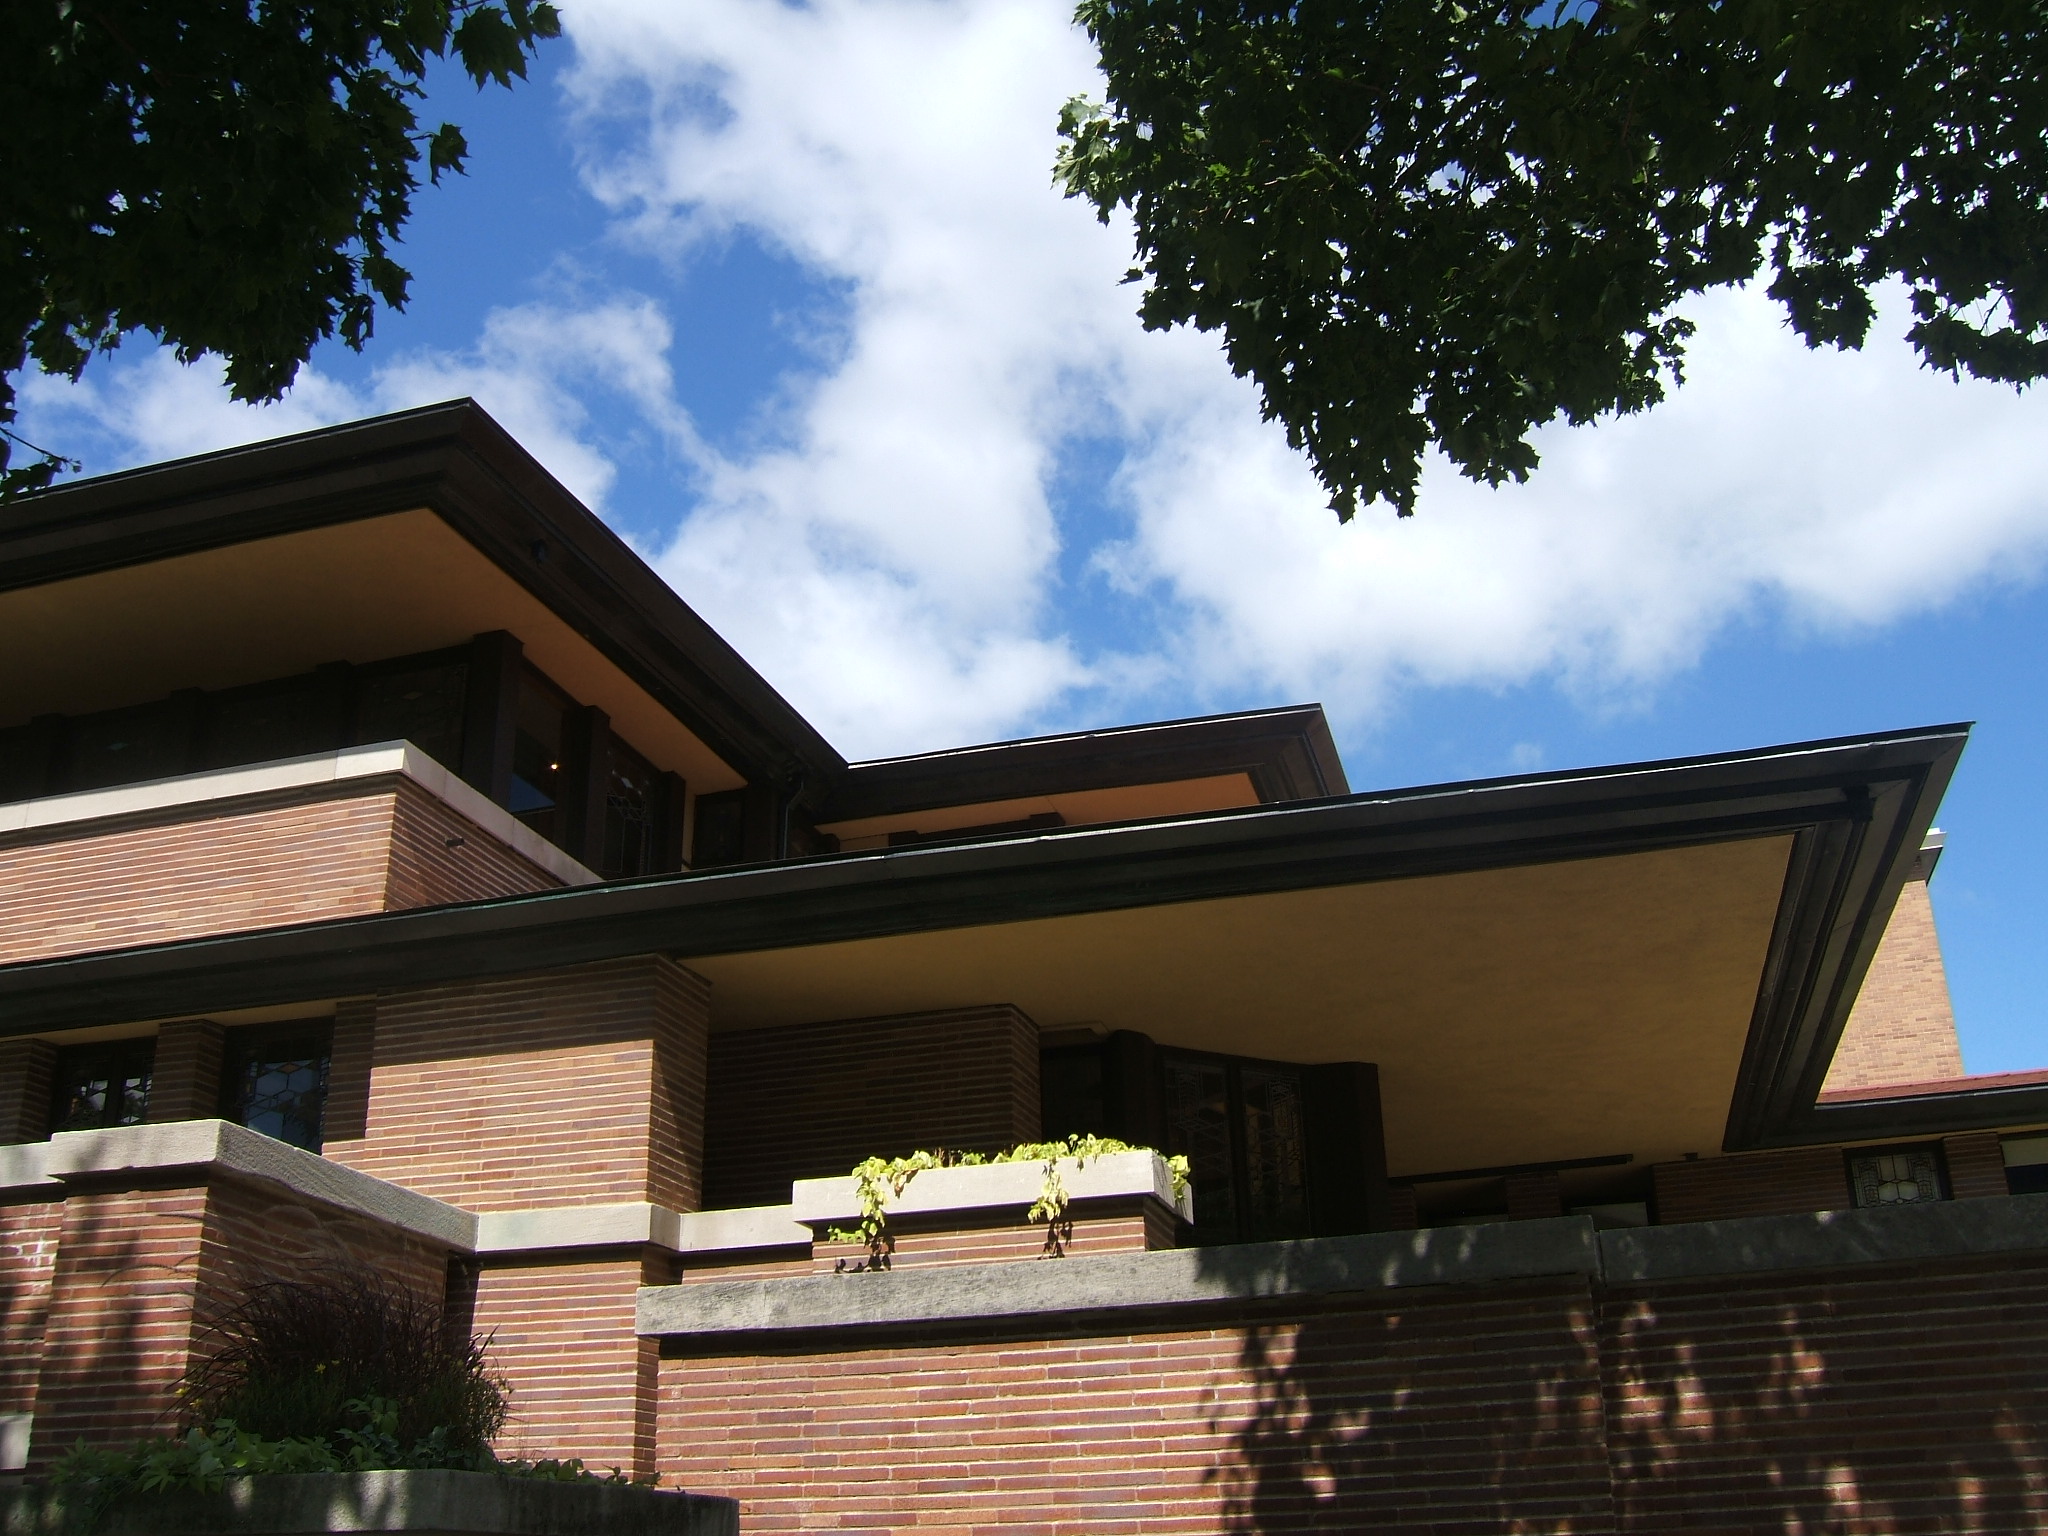 Image of multiple planes at robie house